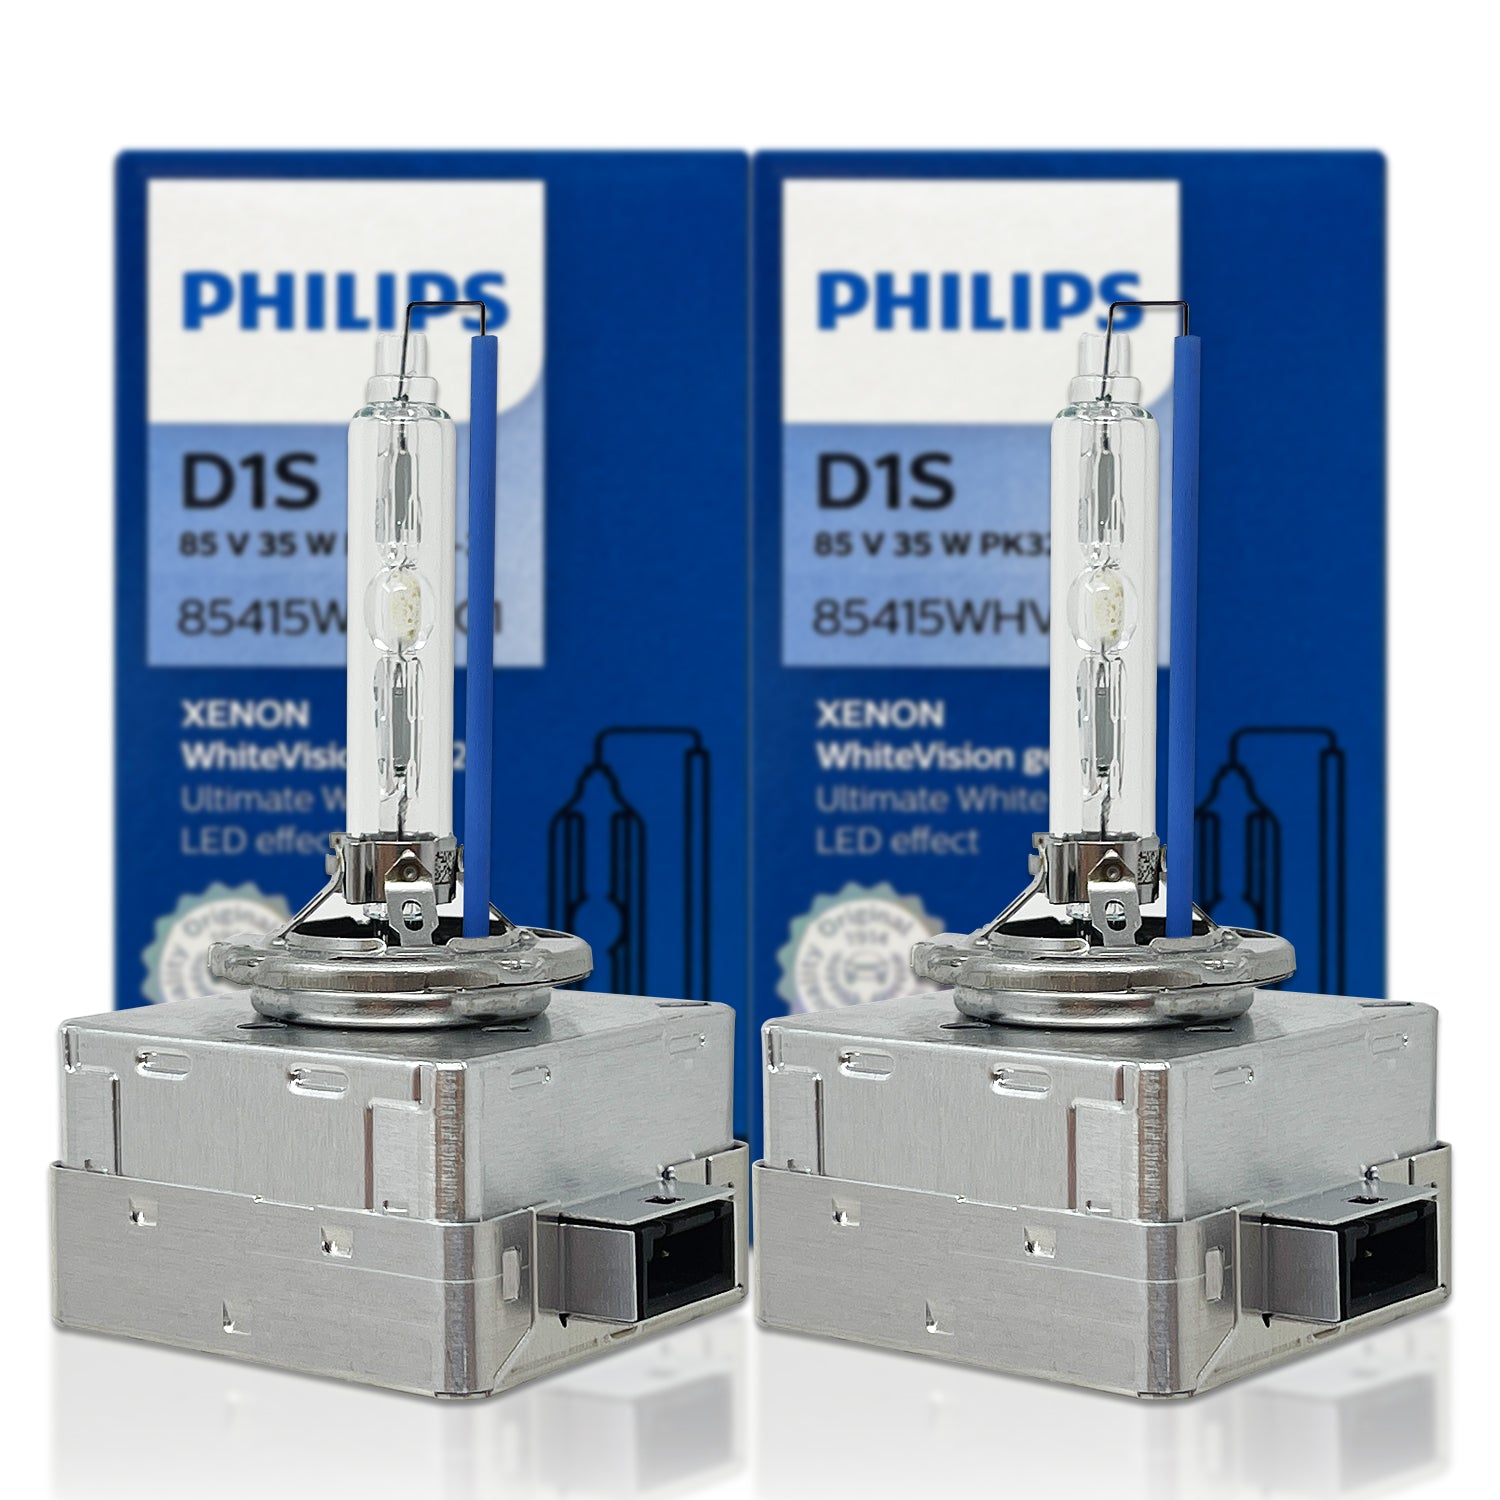 D1S - Philips HID White Vision 5000K 85415WHV2C1 Bulbs (Pack of 2) 